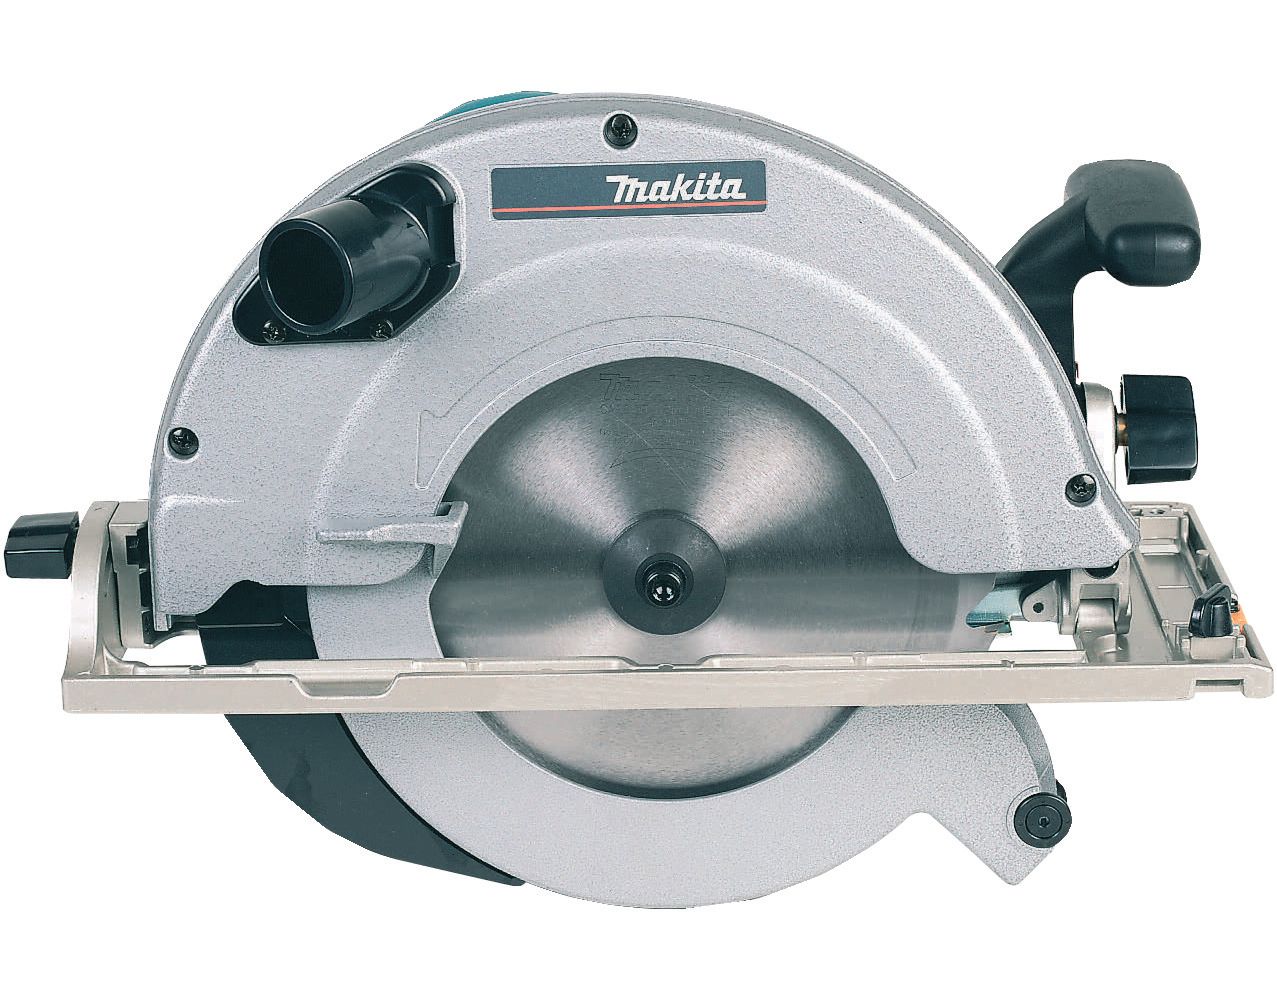 Makita 5903RK 235mm Corded Circular Saw With Case 240V - 1550W